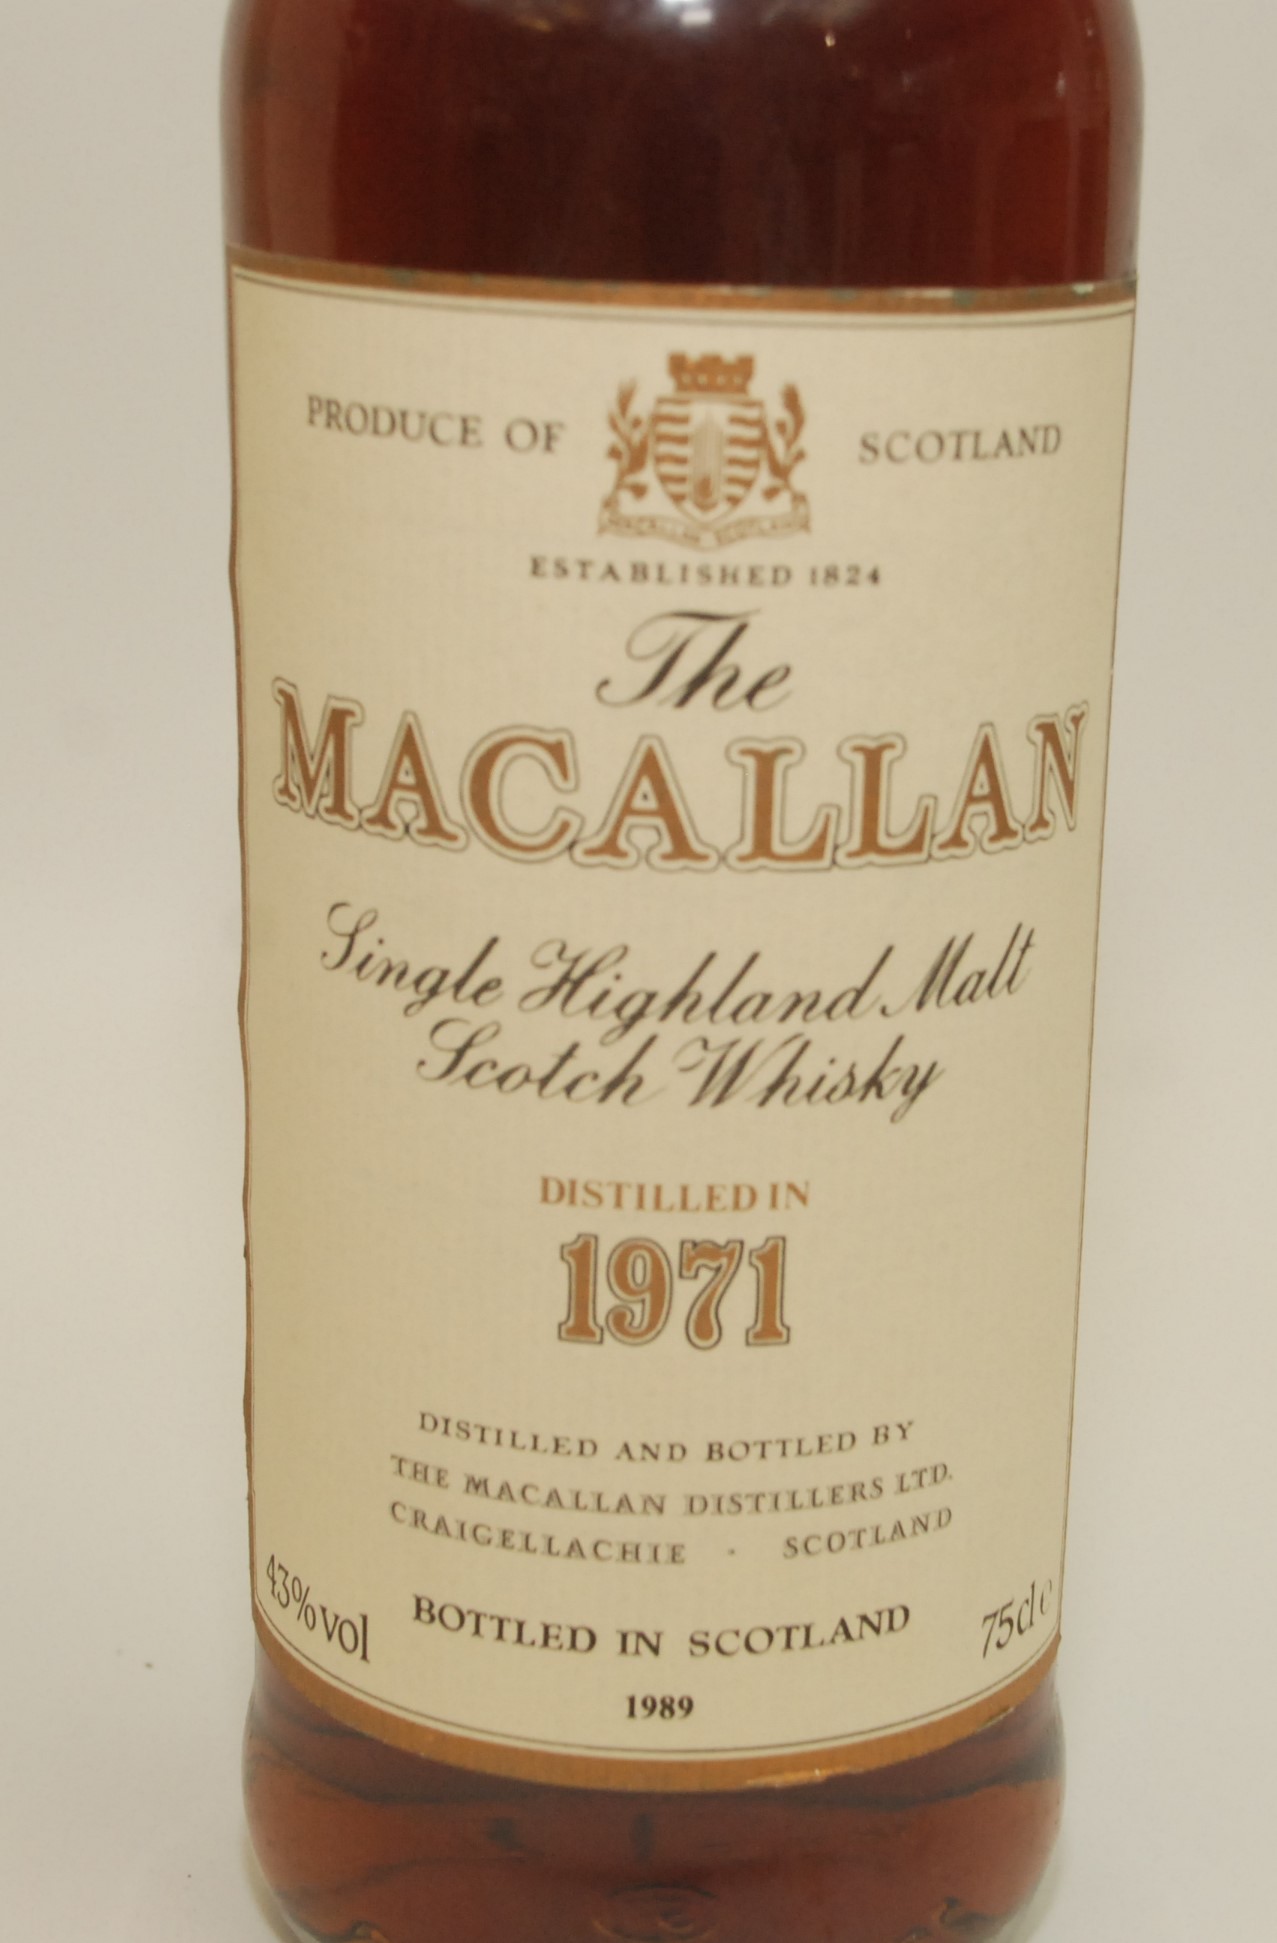 The Macallan a 75cl bottle of 18 year old single malt whisky distilled 1971 in its original box - Image 3 of 6